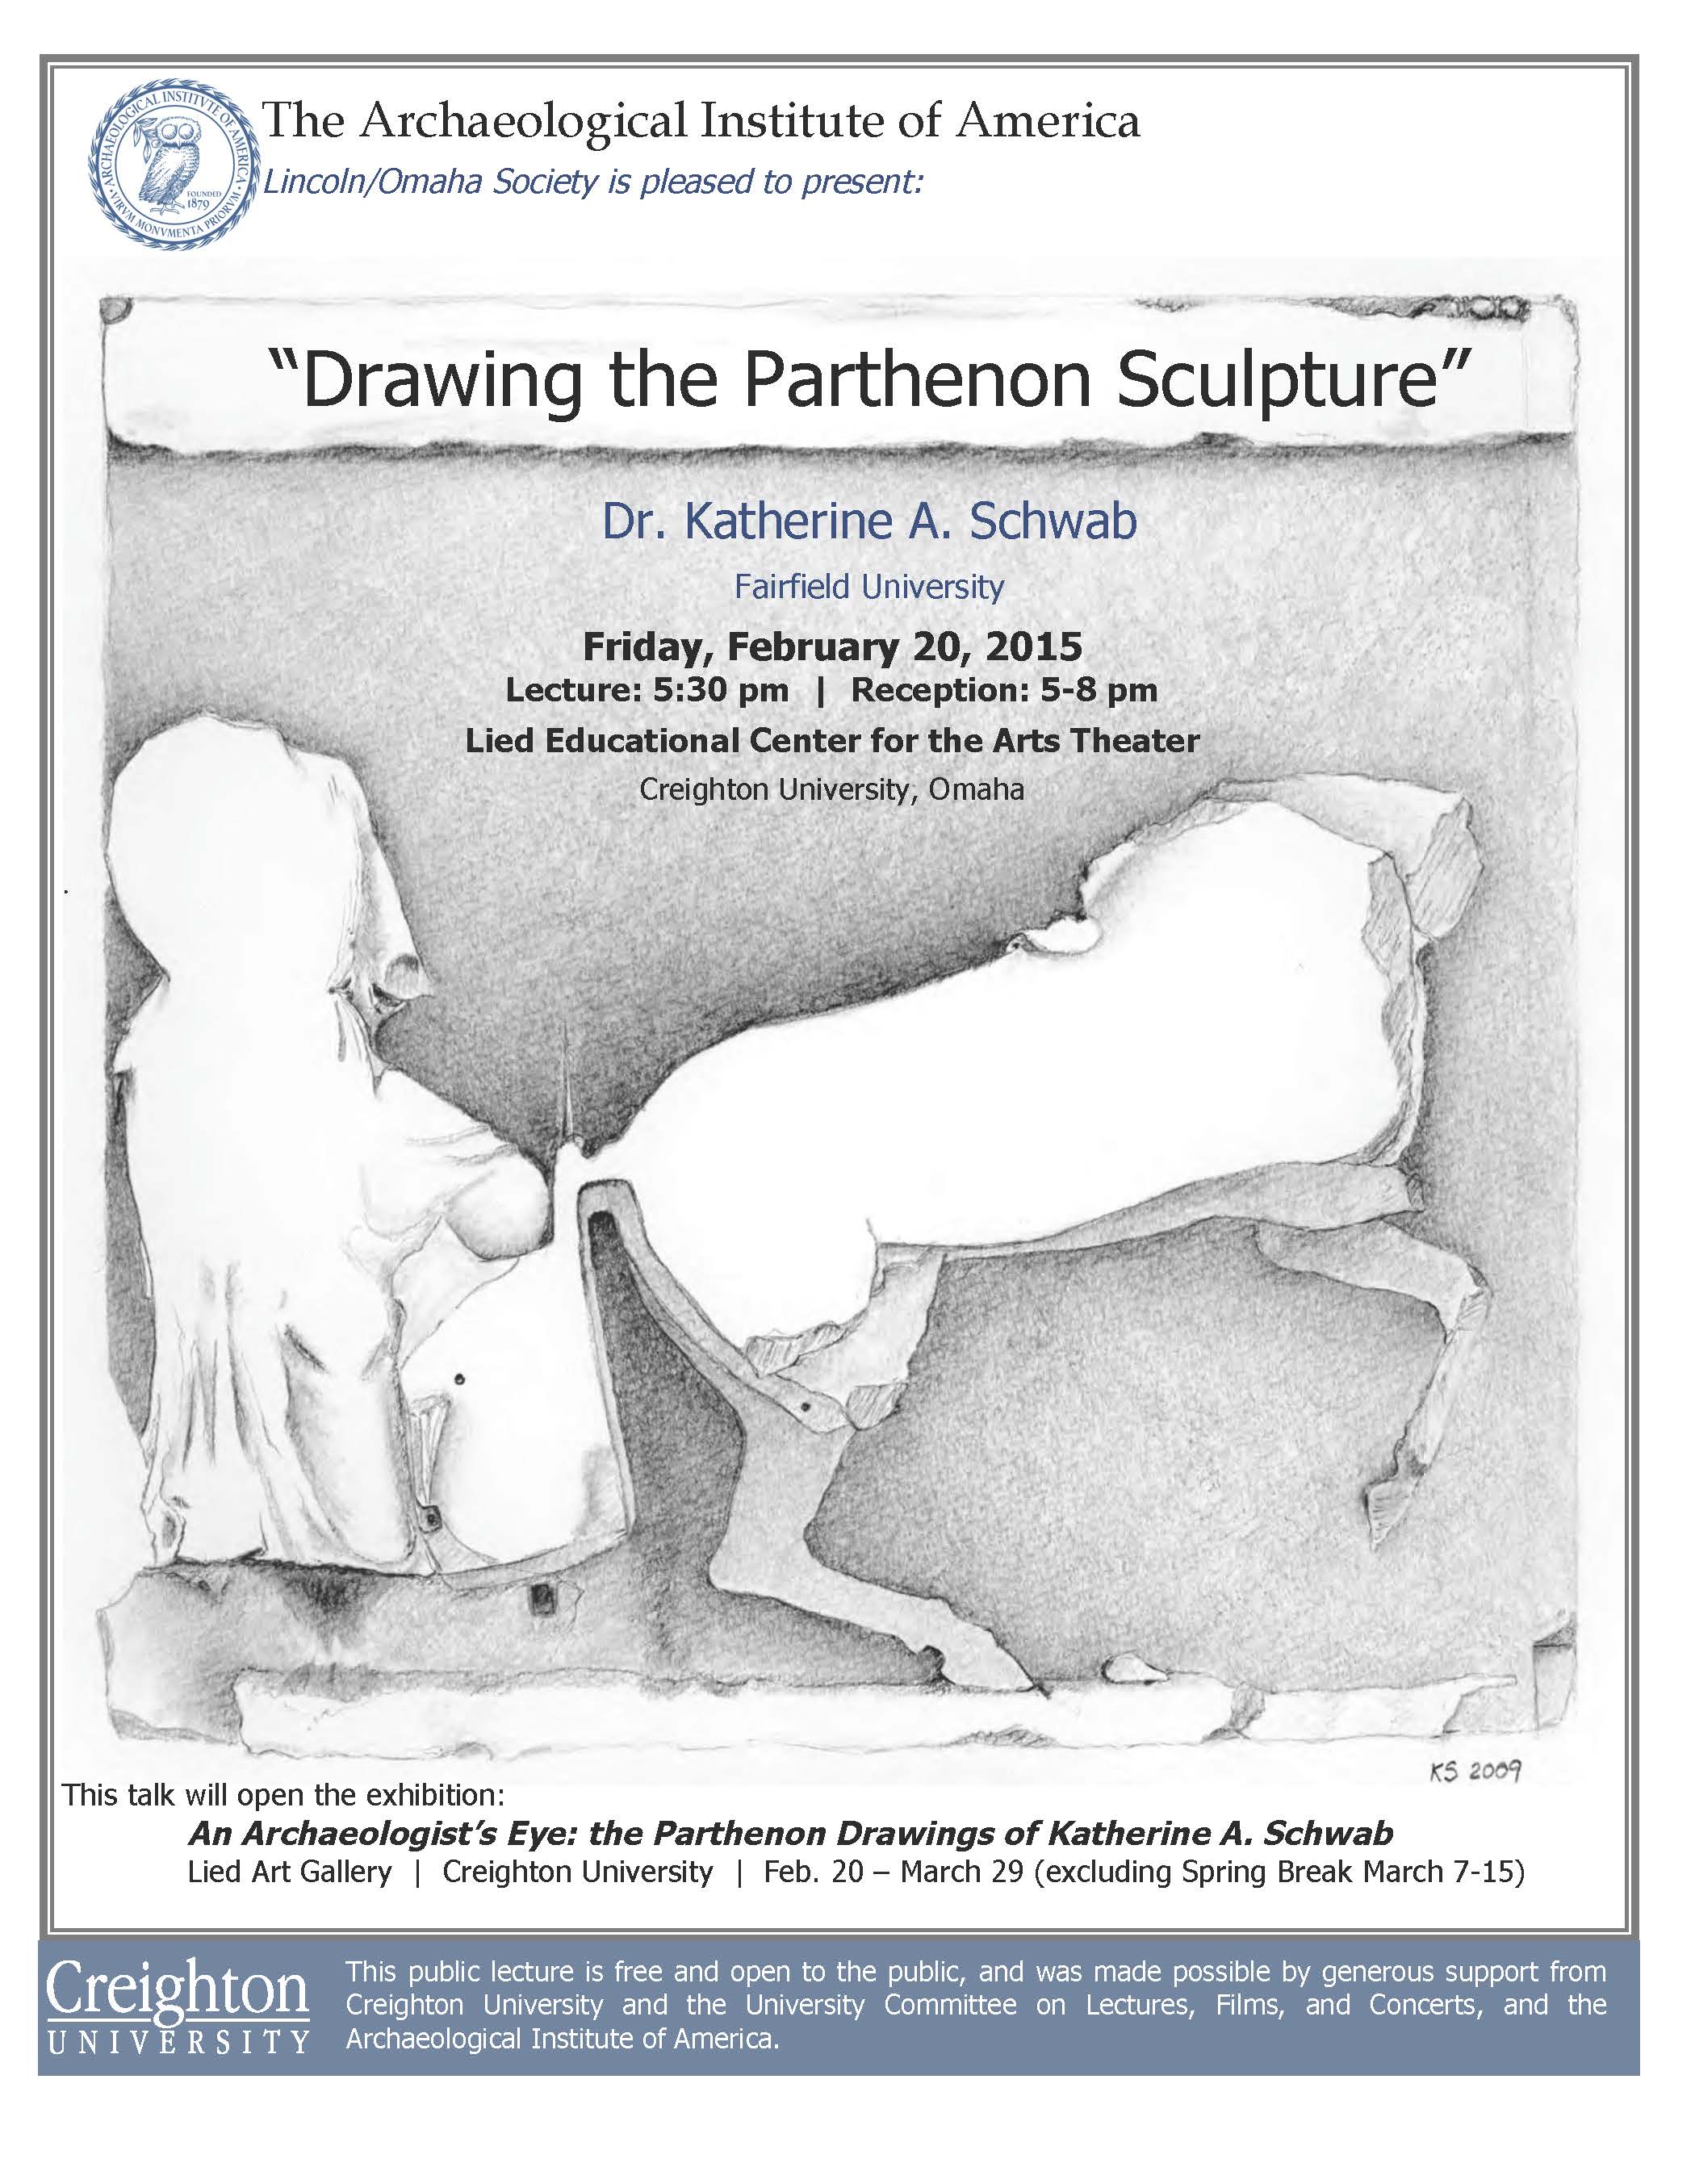 Photo Credit: Drawing the Parthenon Sculpture